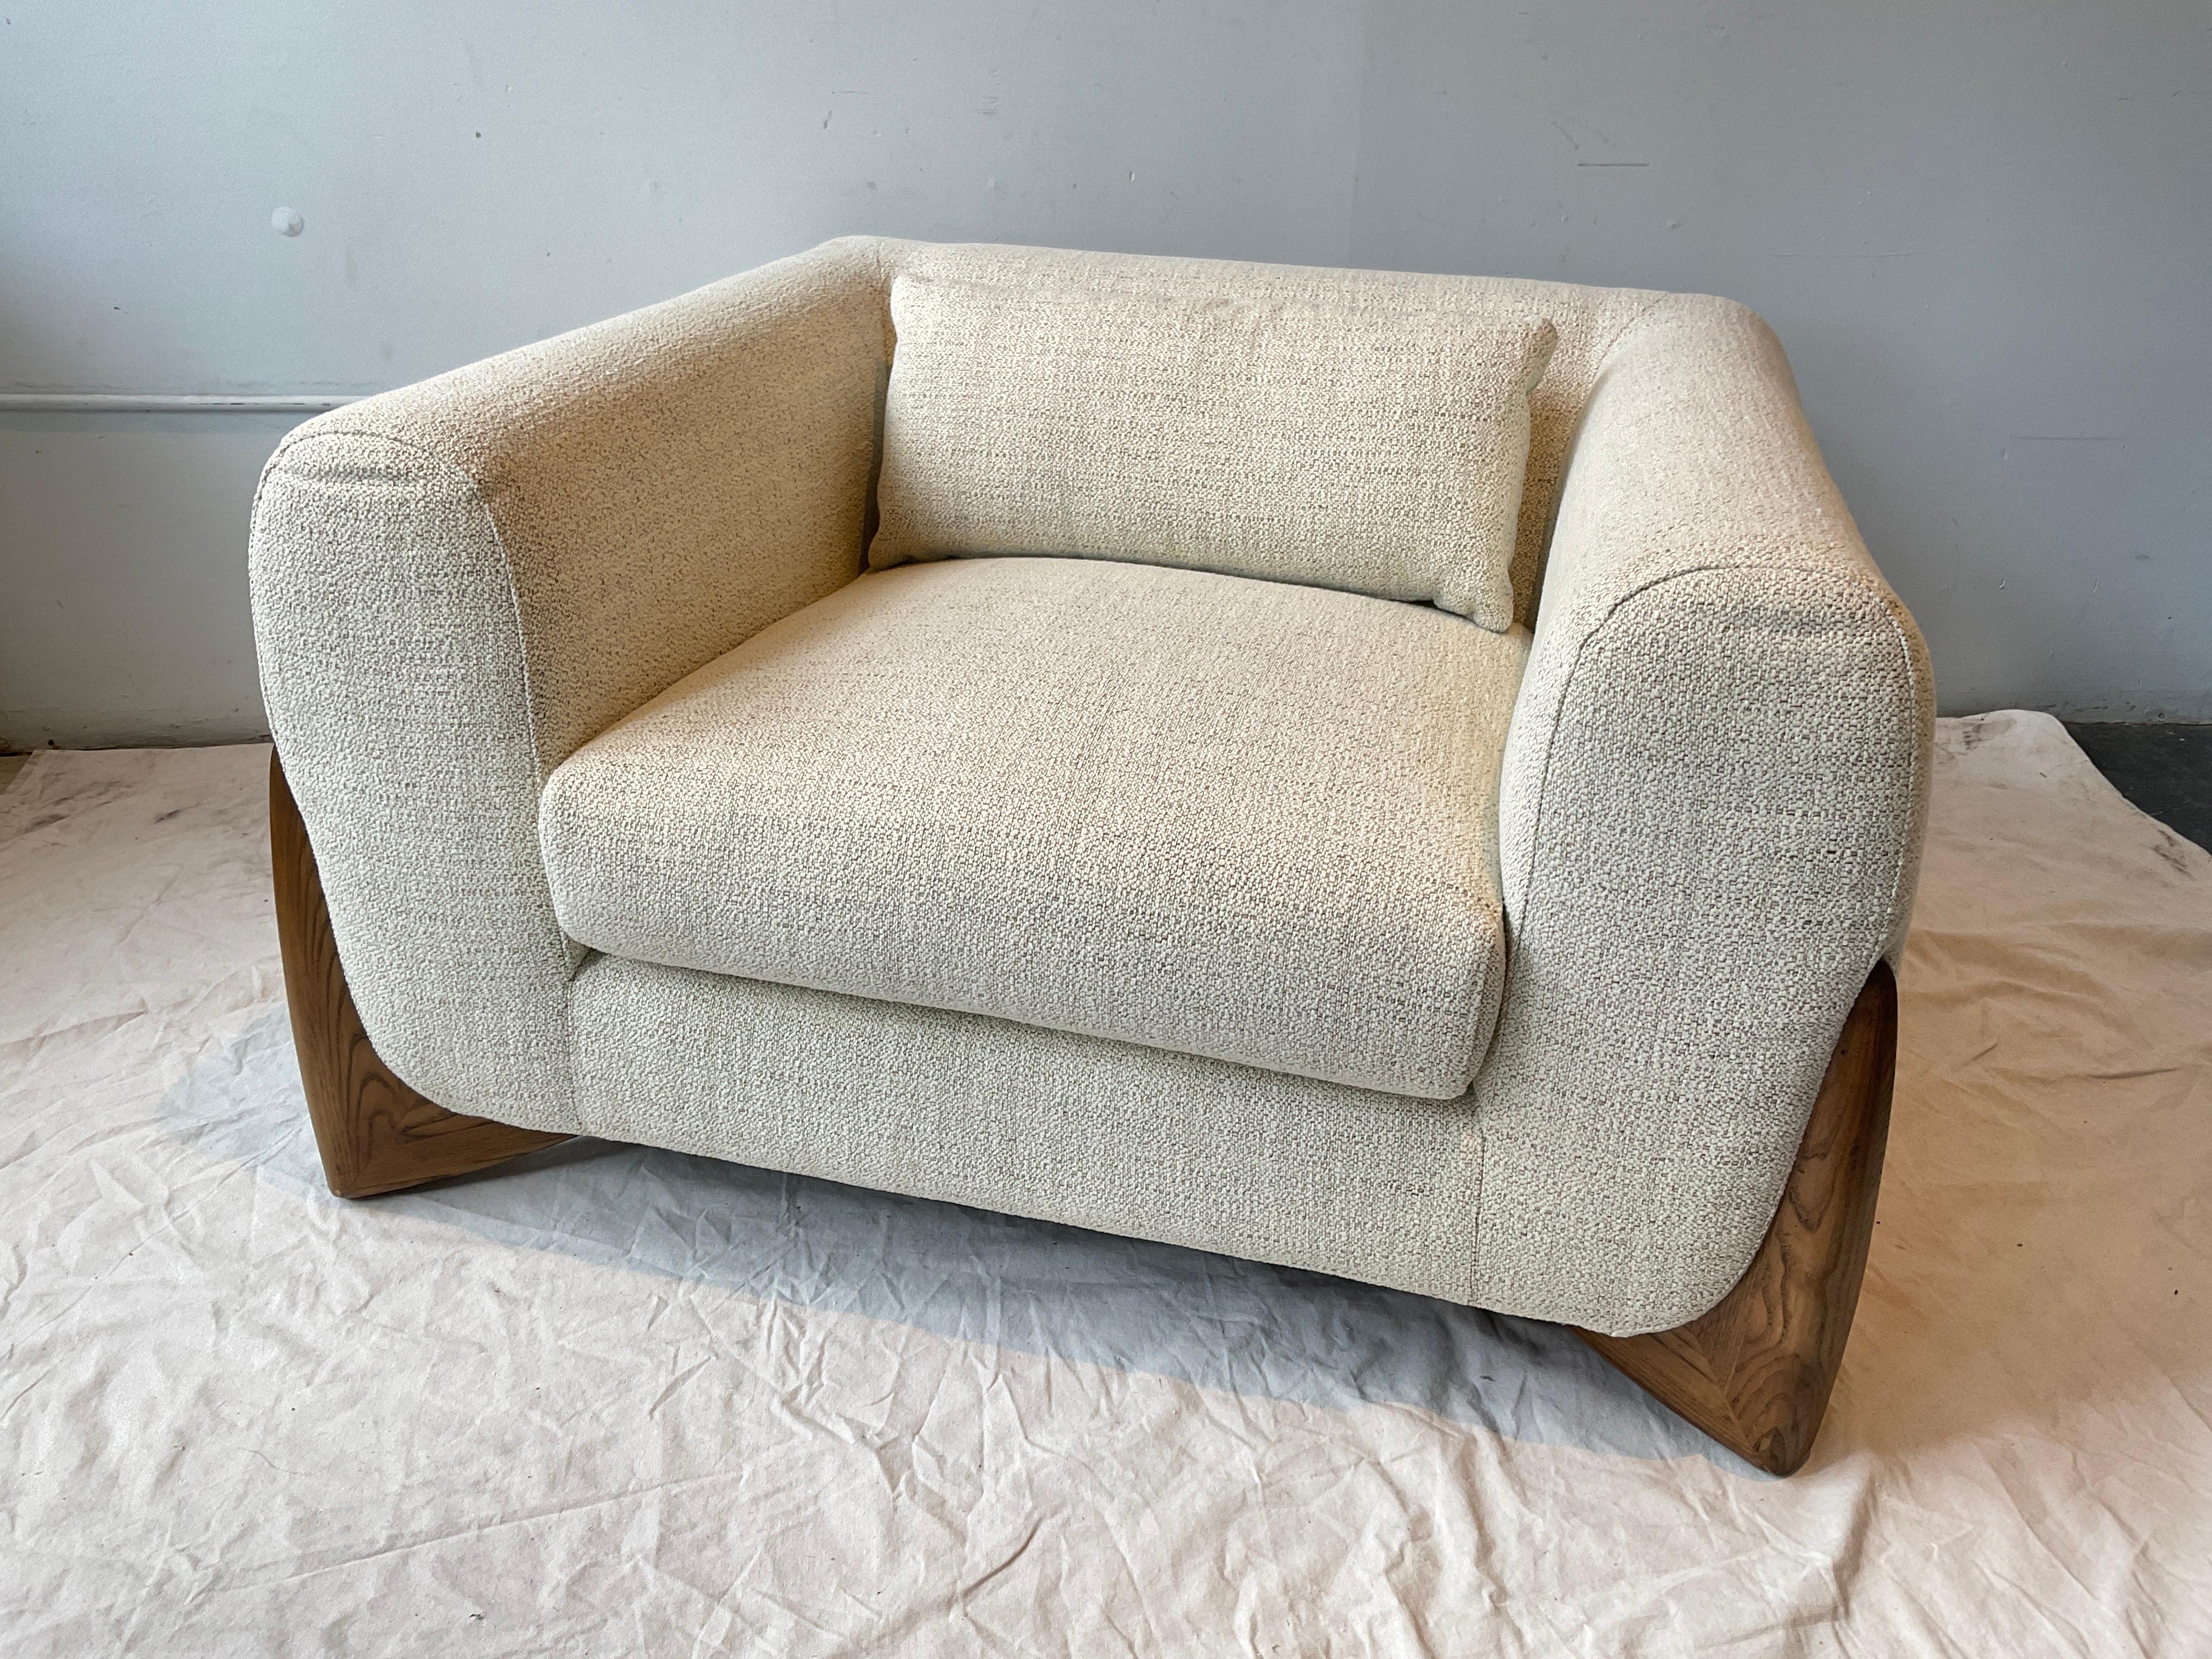 Alder & Tweed Crosby Chair In Good Condition For Sale In Tarrytown, NY